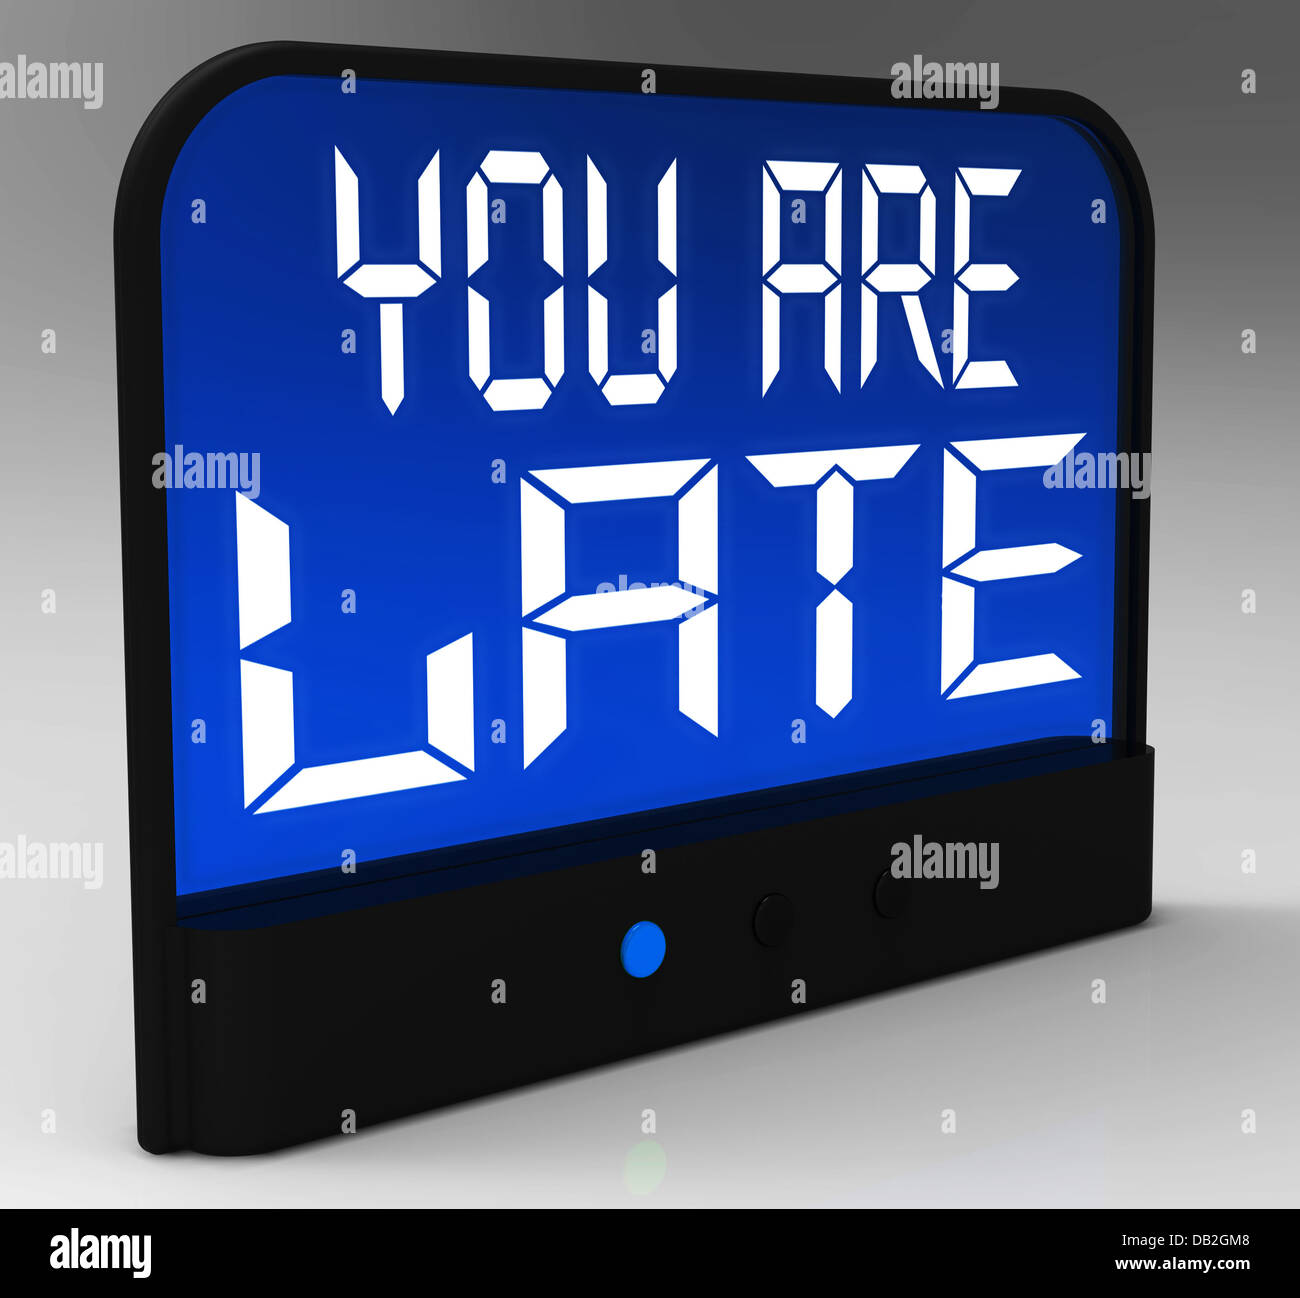 You Are Late Message Showing Tardiness And Lateness Stock Photo